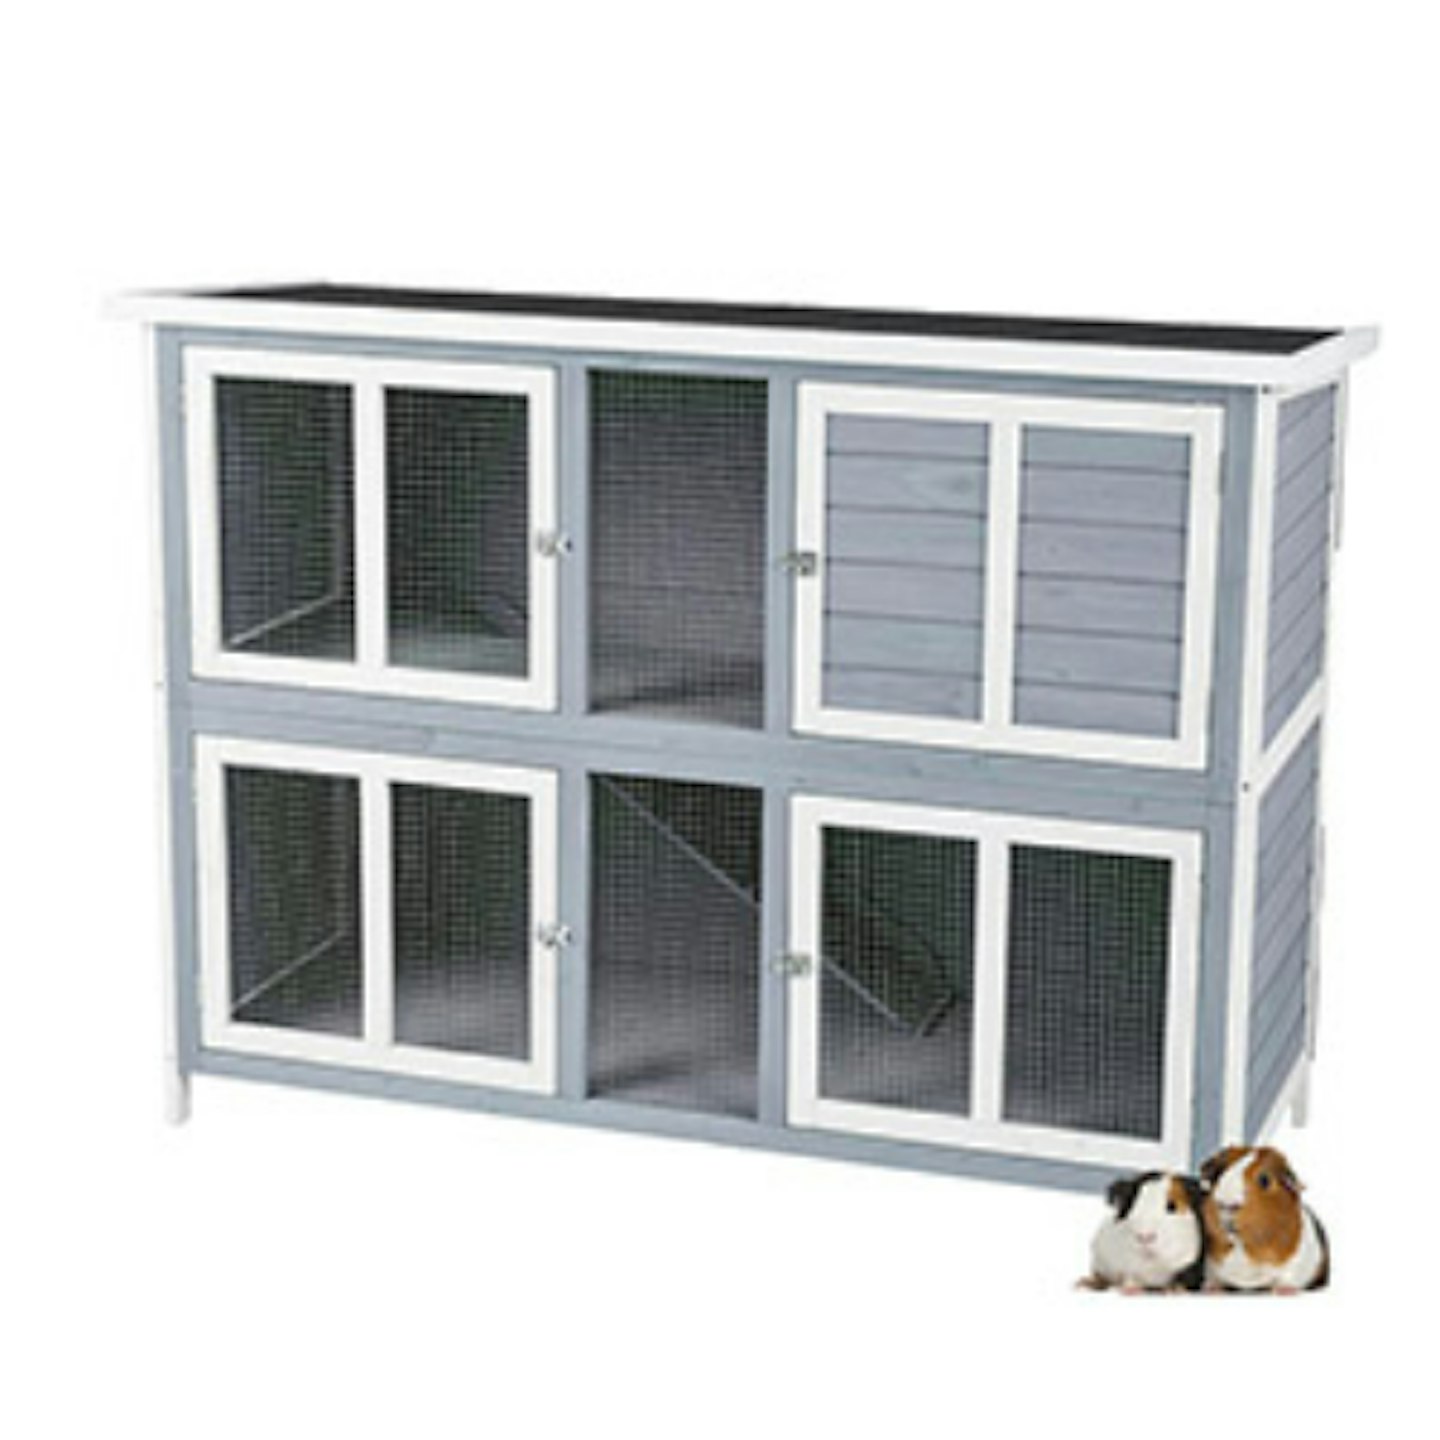 Pets at Home Bluebell Hideaway Guinea Pig and Rabbit Hutch 5ft Grey & White